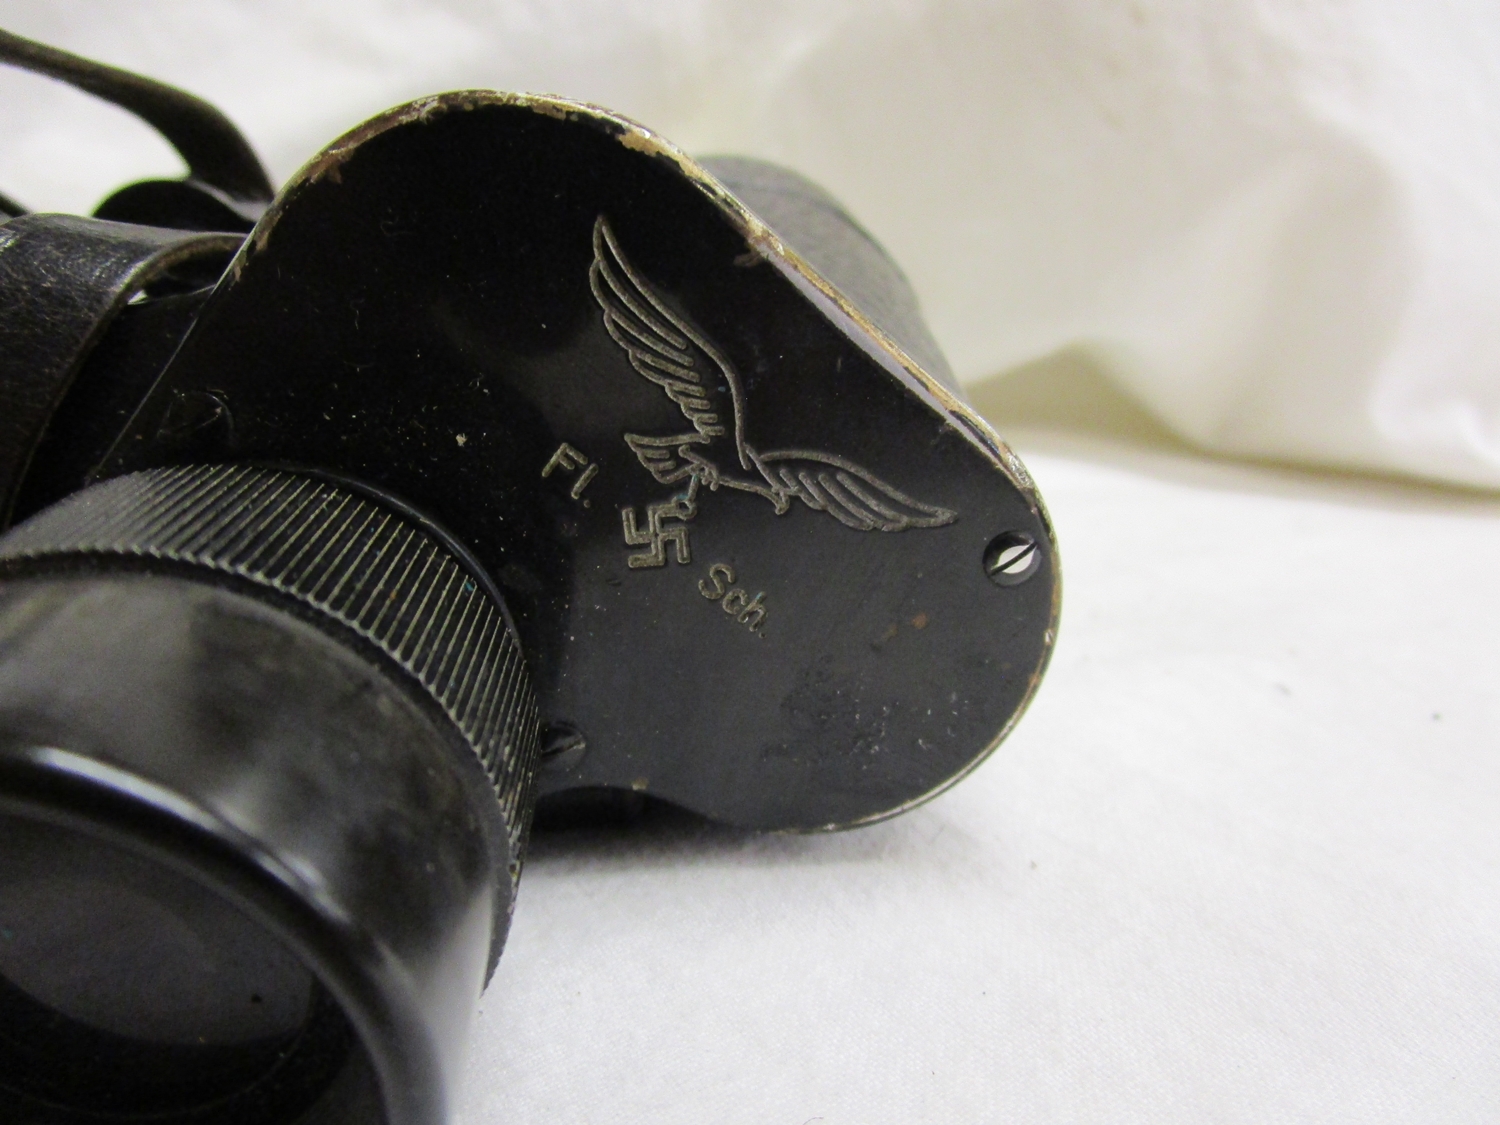 Nazi WWII Carl Zeiss 7x50 binoculars, marked with eagle and swastika - Image 4 of 10